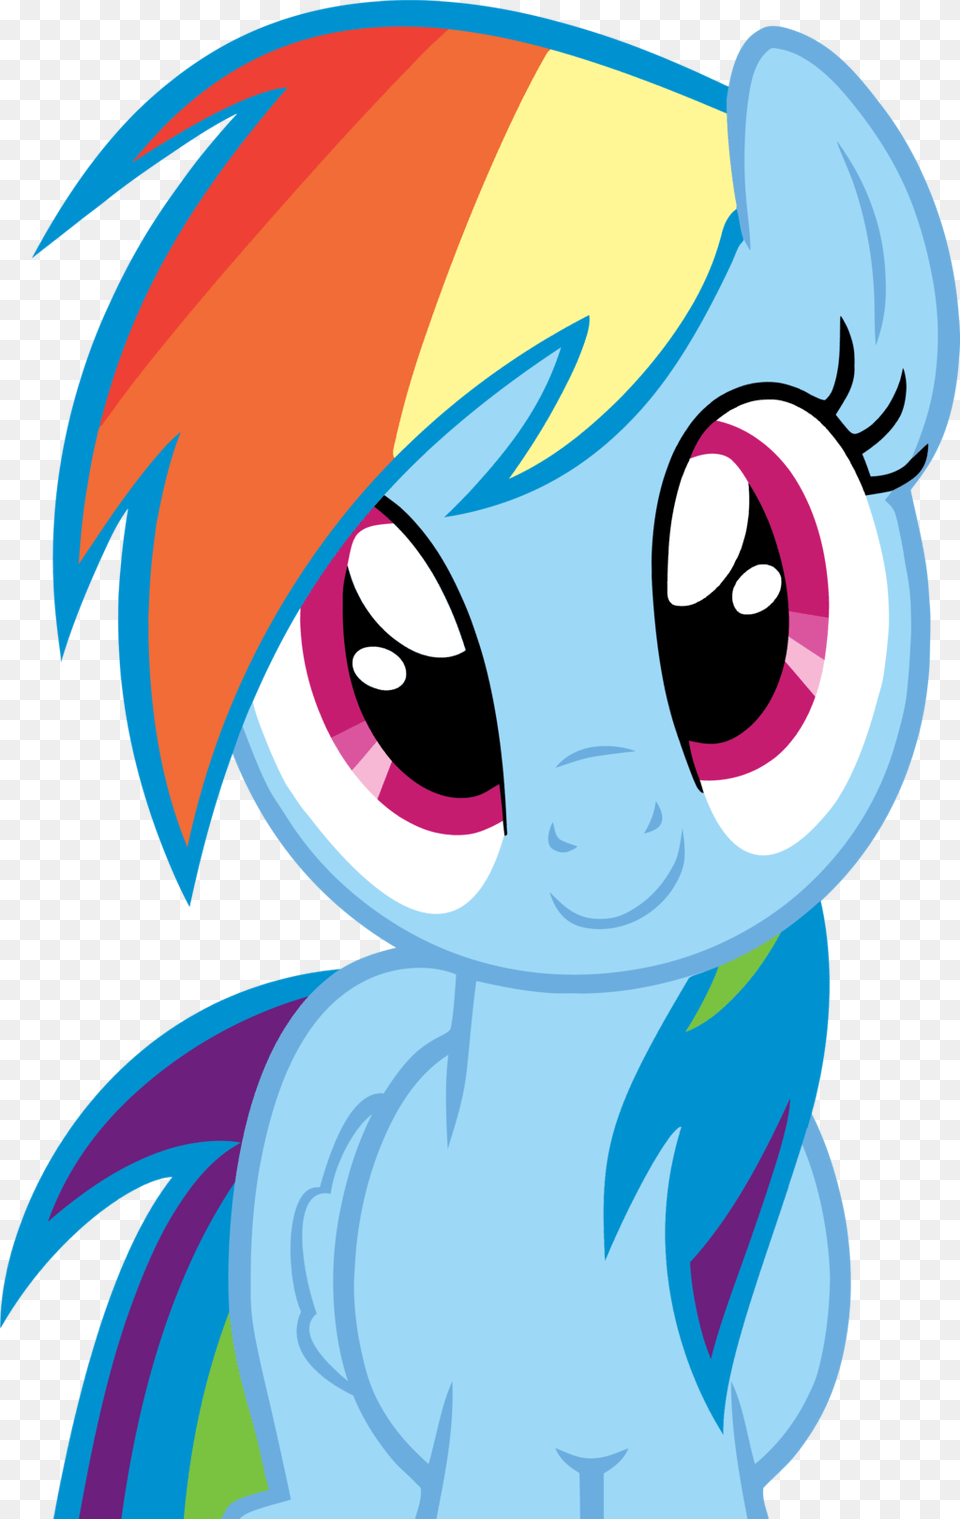 Rainbow Dash Innocent Smile By Rontoday My Little Pony Rainbow Dash Smile, Book, Comics, Publication, Art Png Image